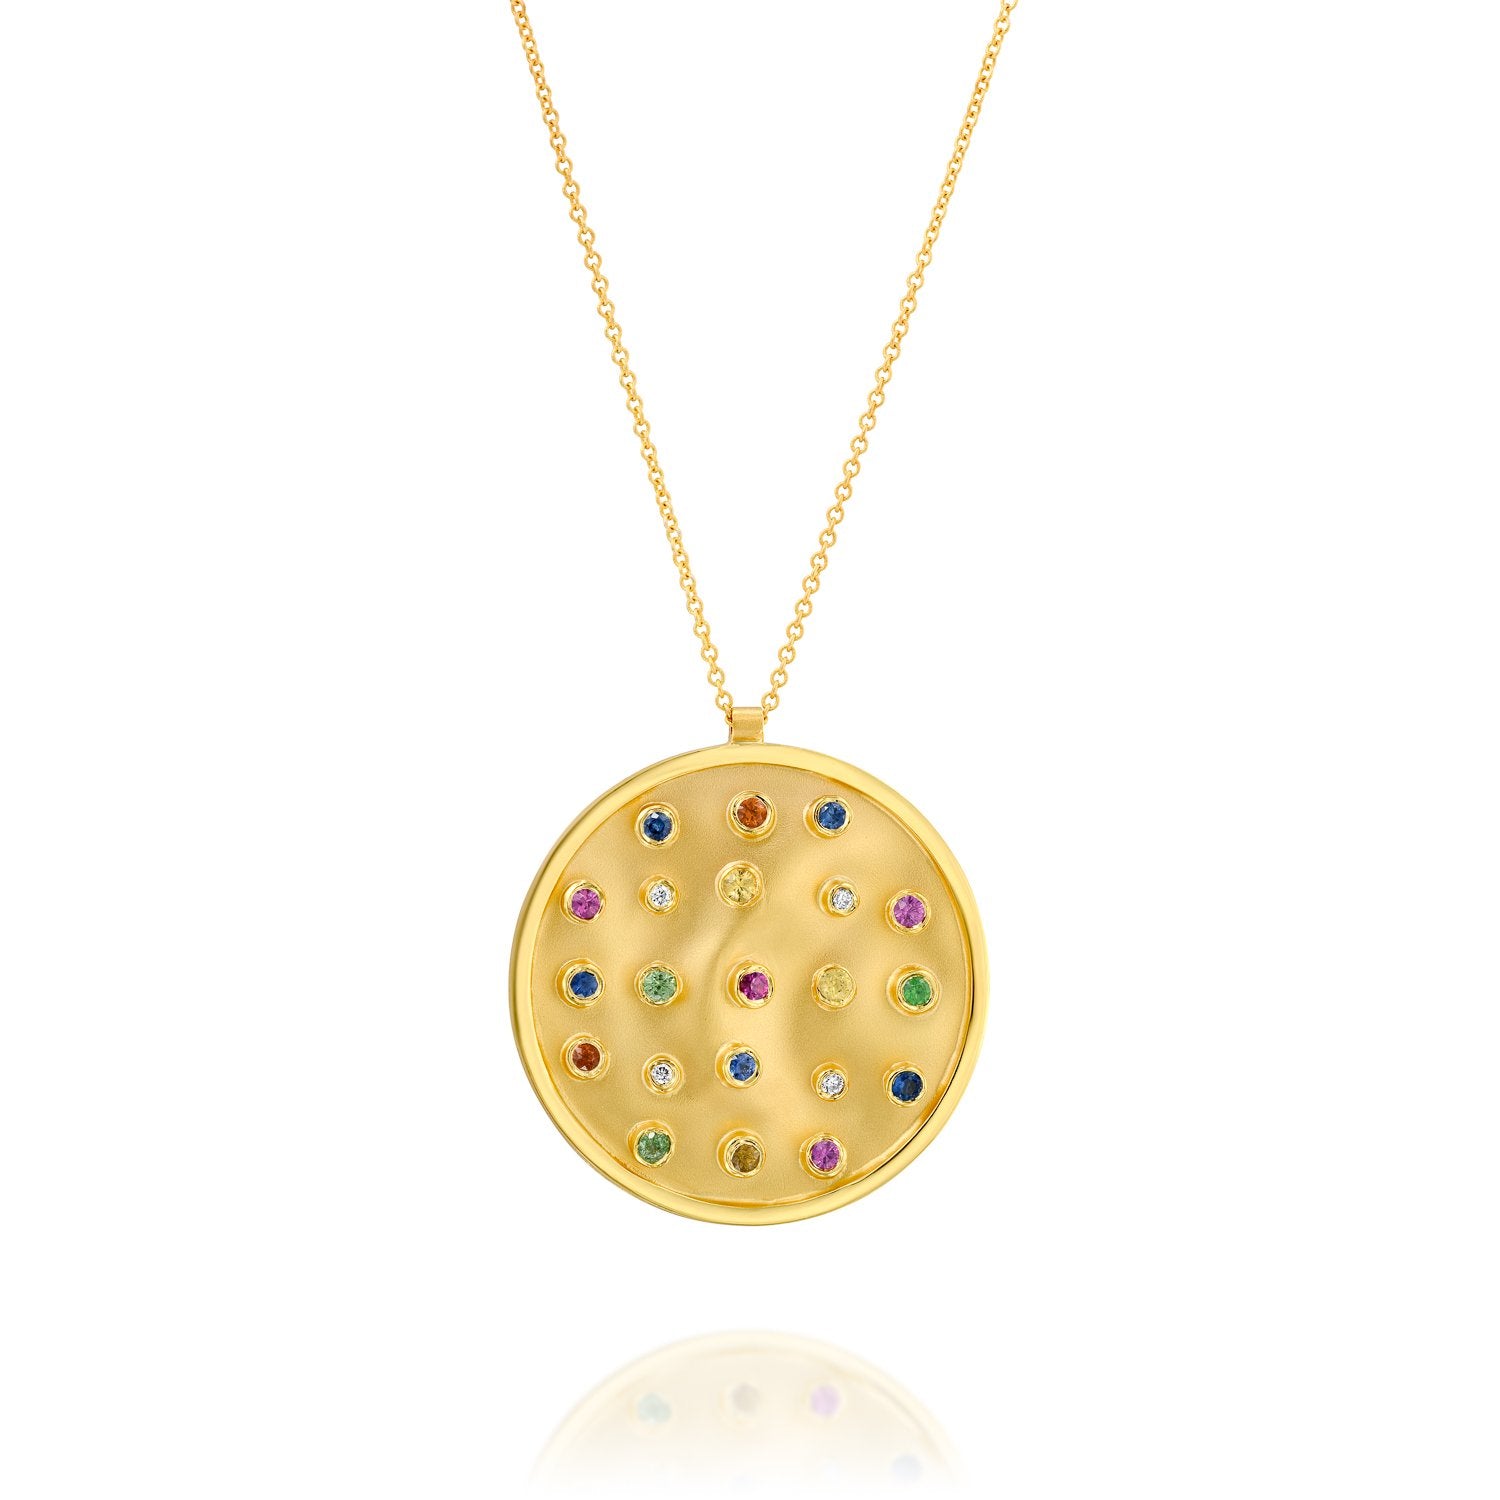 3442 - 14kt yellow gold matte satin round necklace, shiny edges with white diamonds & multi-color natural sapphires.